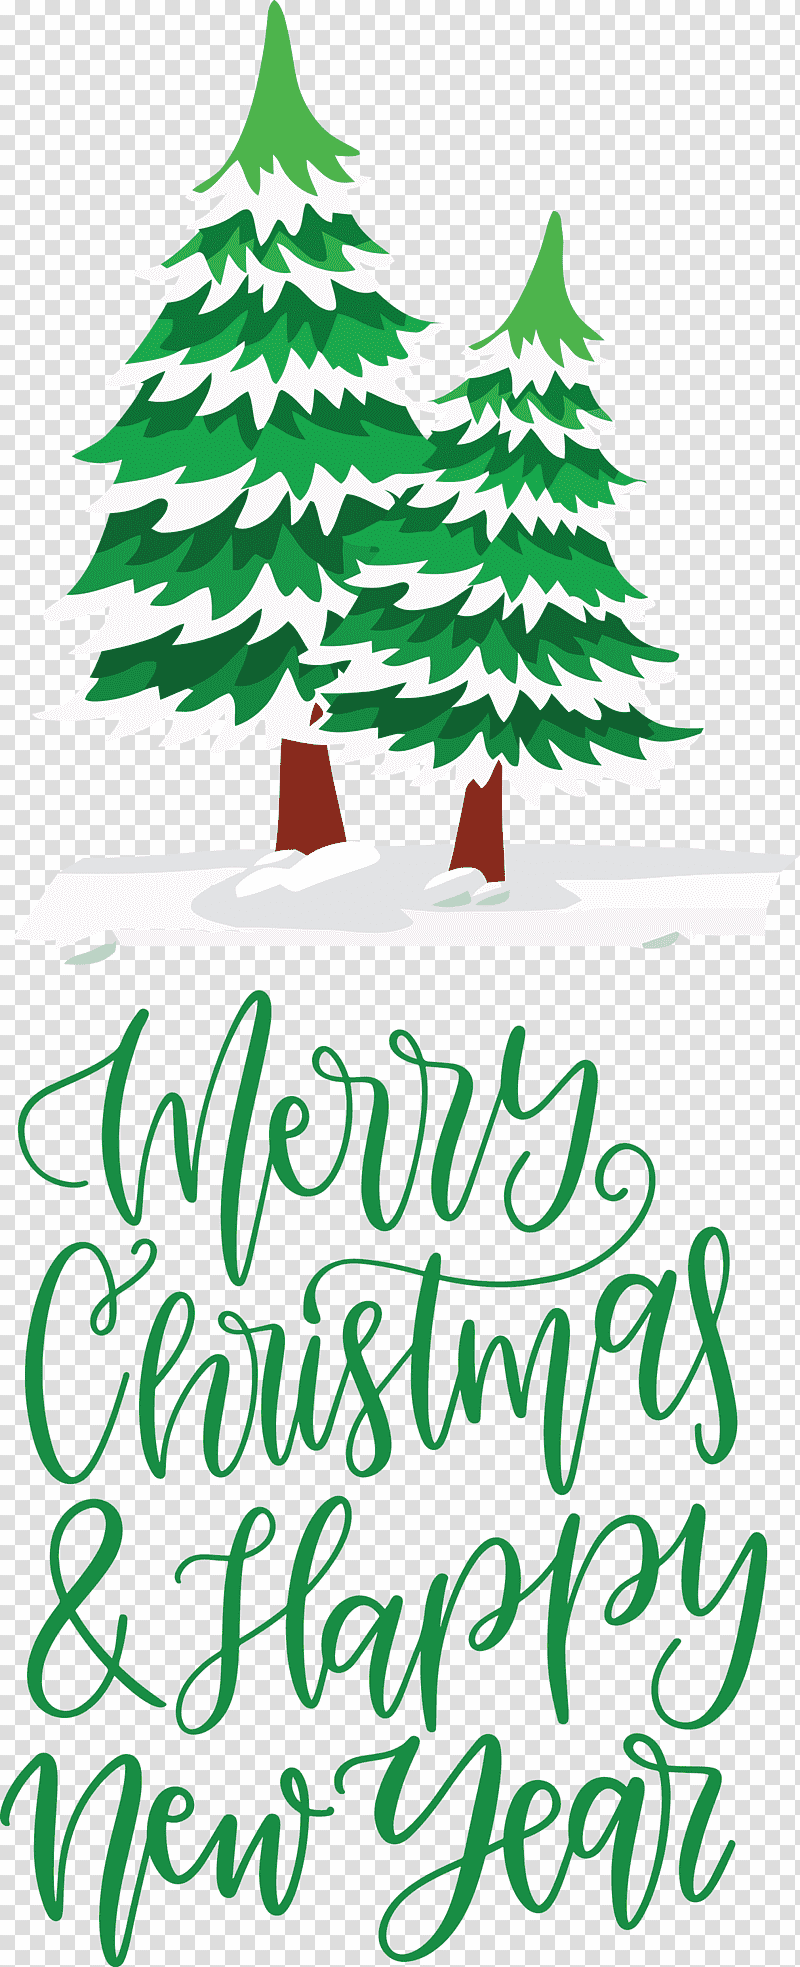 Merry Christmas Happy New Year, Christmas Tree, Meter, Christmas Day, Spruce, Christmas Ornament M, Holiday transparent background PNG clipart